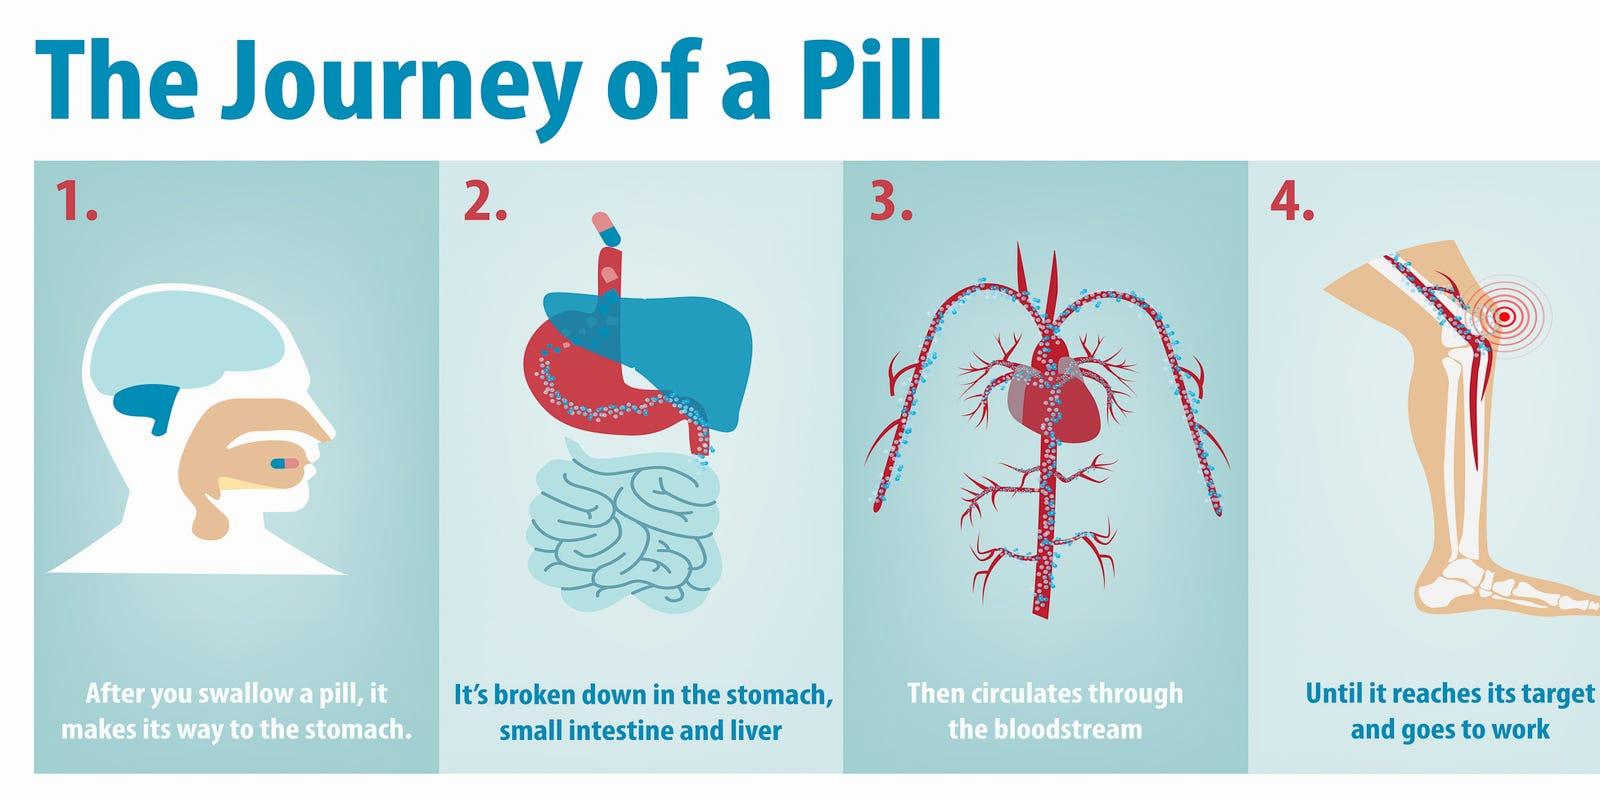 This image shows the journey of a pill through the body, from being swallowed to reaching its target and going to work.